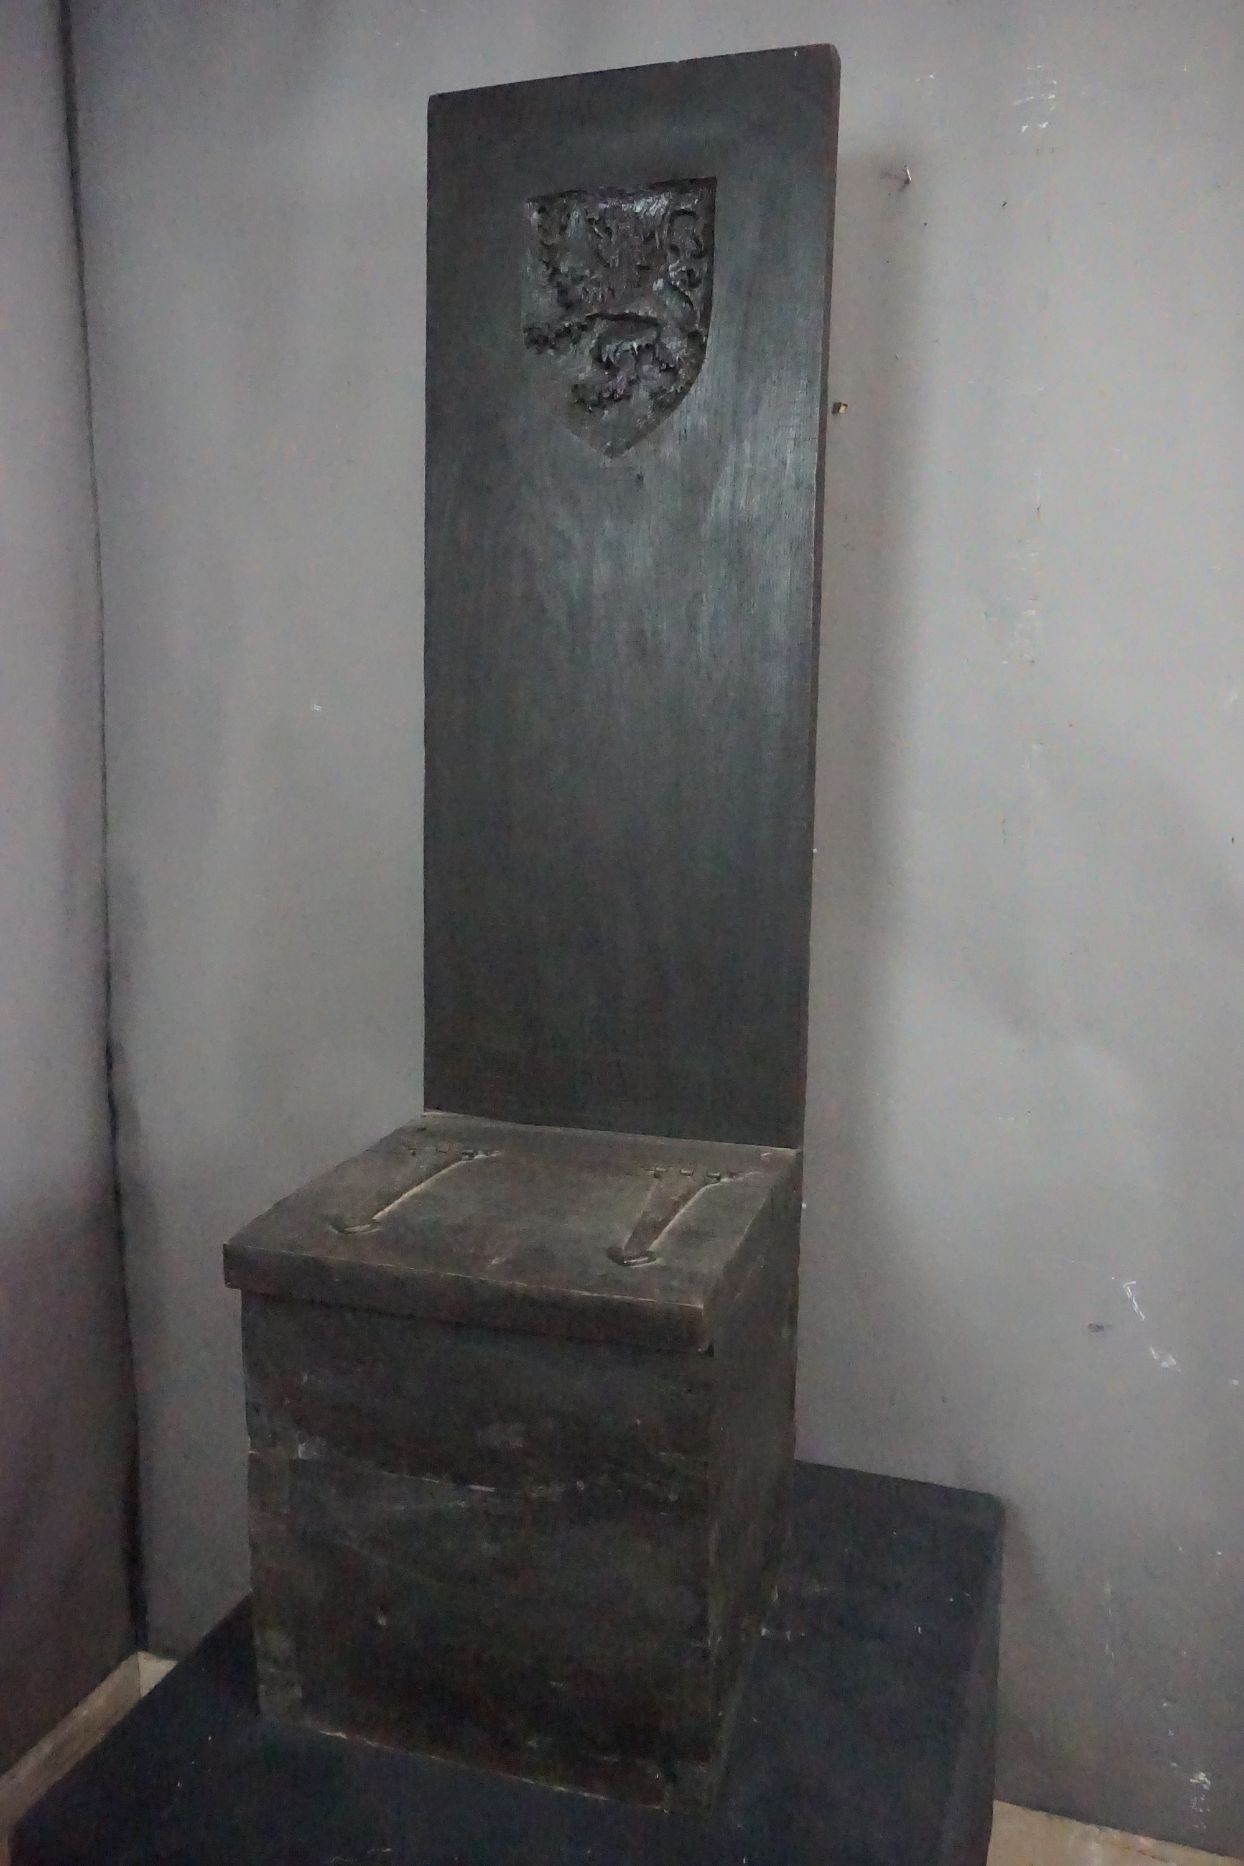 Throne / suitcase in wood with coat of arms H144x40x43